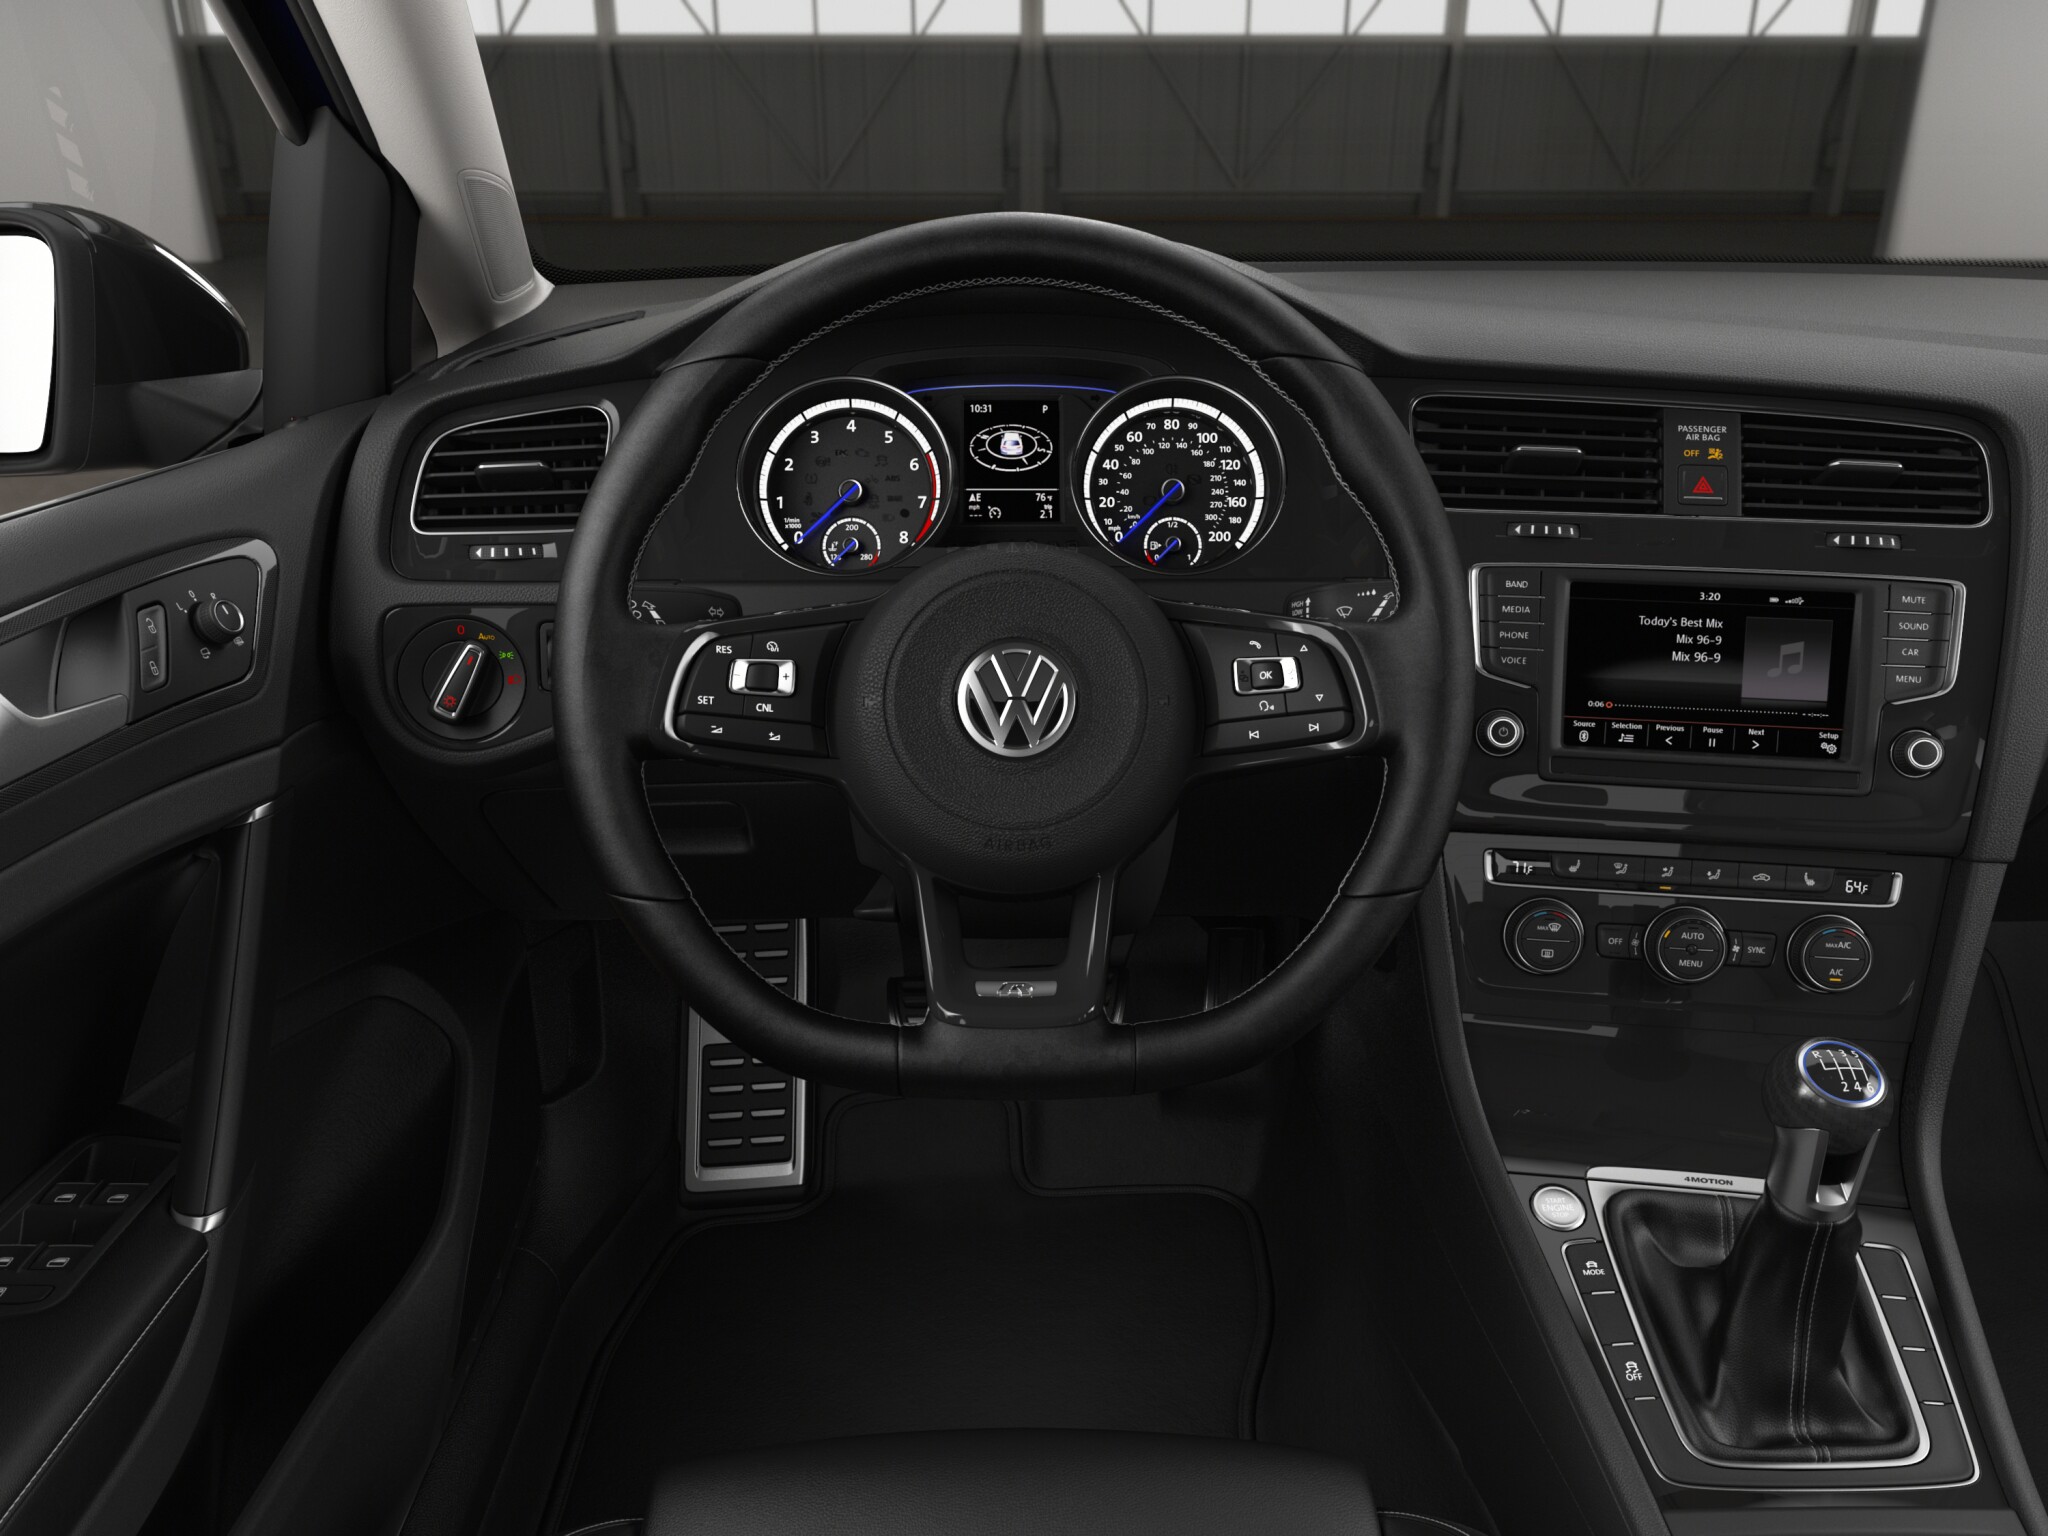 Volkswagen Golf R DCC Navication front seat view